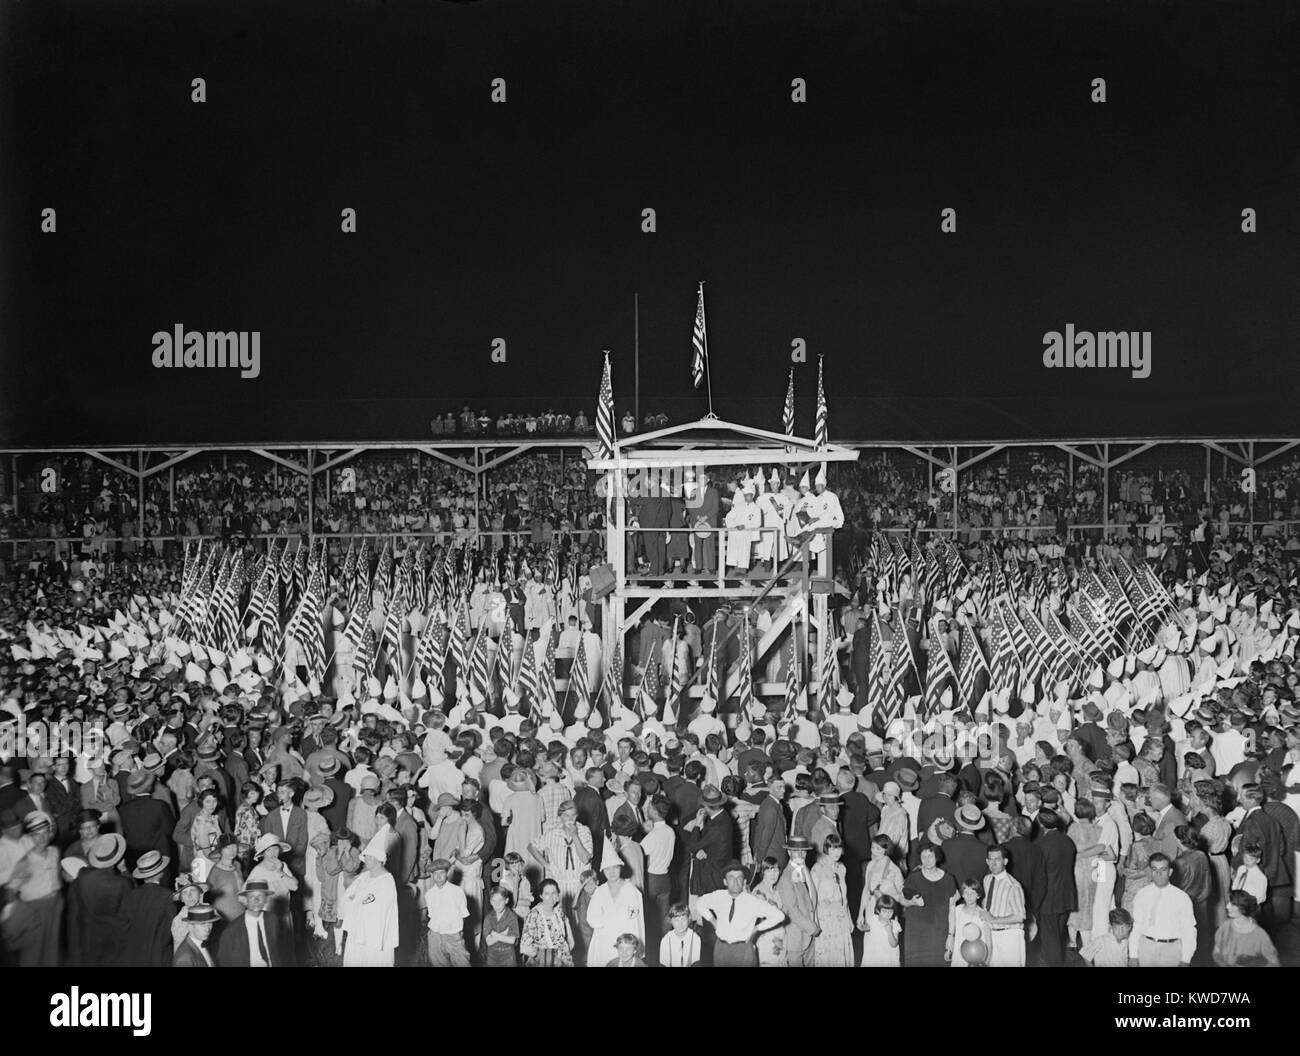 Ku Klux Klan nighttime ceremony during the great gathering in Washington, D.C. August 8, 1925. Klansmen hold dozens of American Flags in a circle around a raised Speaker's platform. Outside of the circle are a milling crowd of men, women, and some families. (BSLOC 2015 16 178) Stock Photo